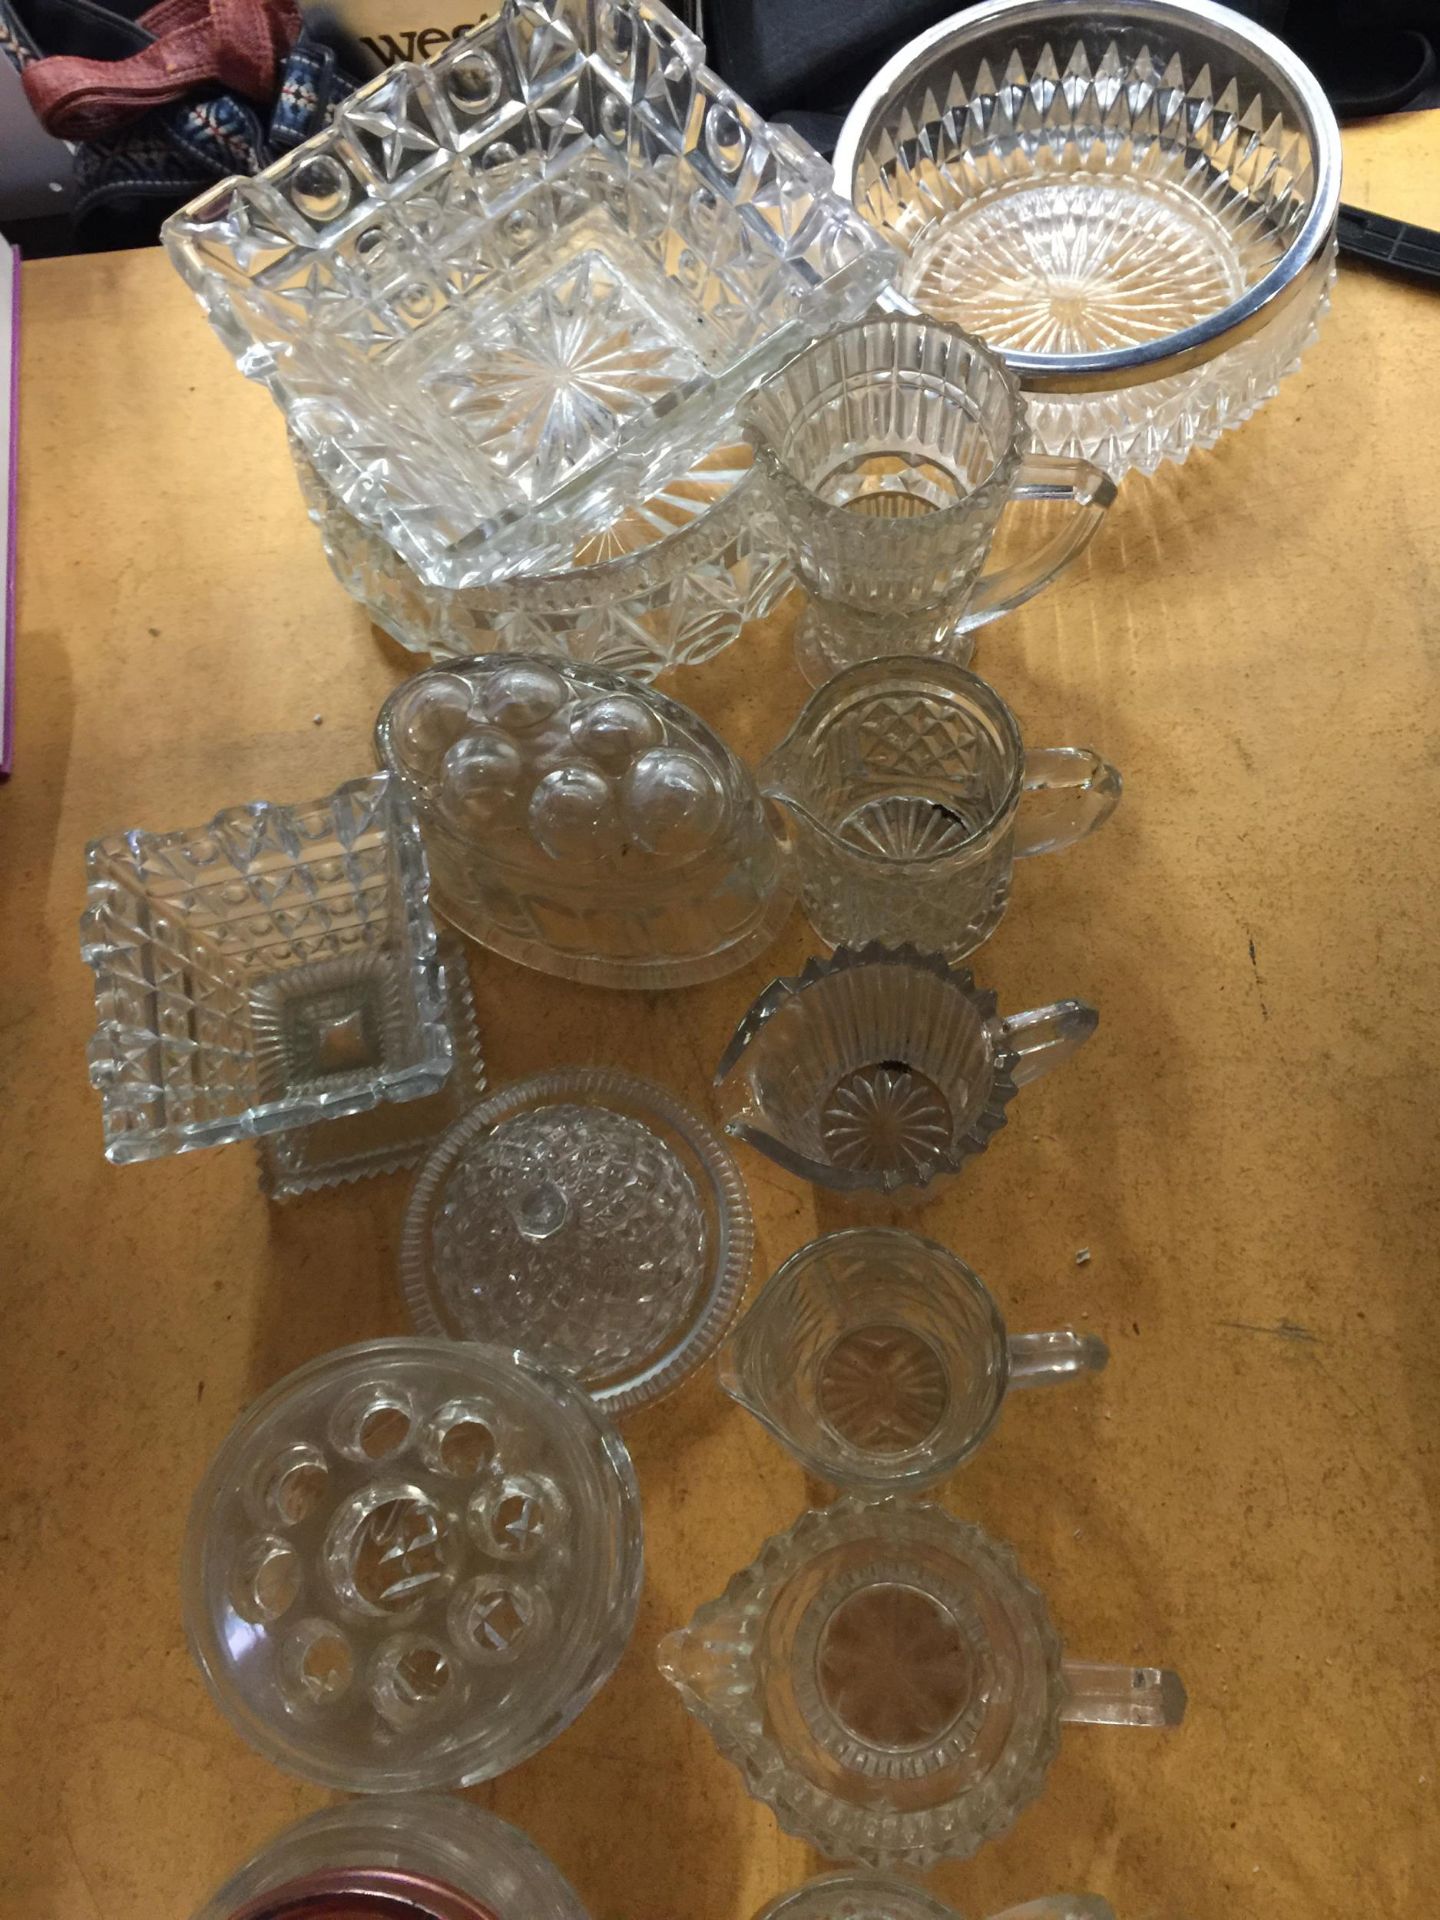 A LARGE QUANTITY OF VINTAGE GLASSWARE TO INCLUDE BOWLS, JUGS, A JELLY MOULD, ETC - Image 3 of 3